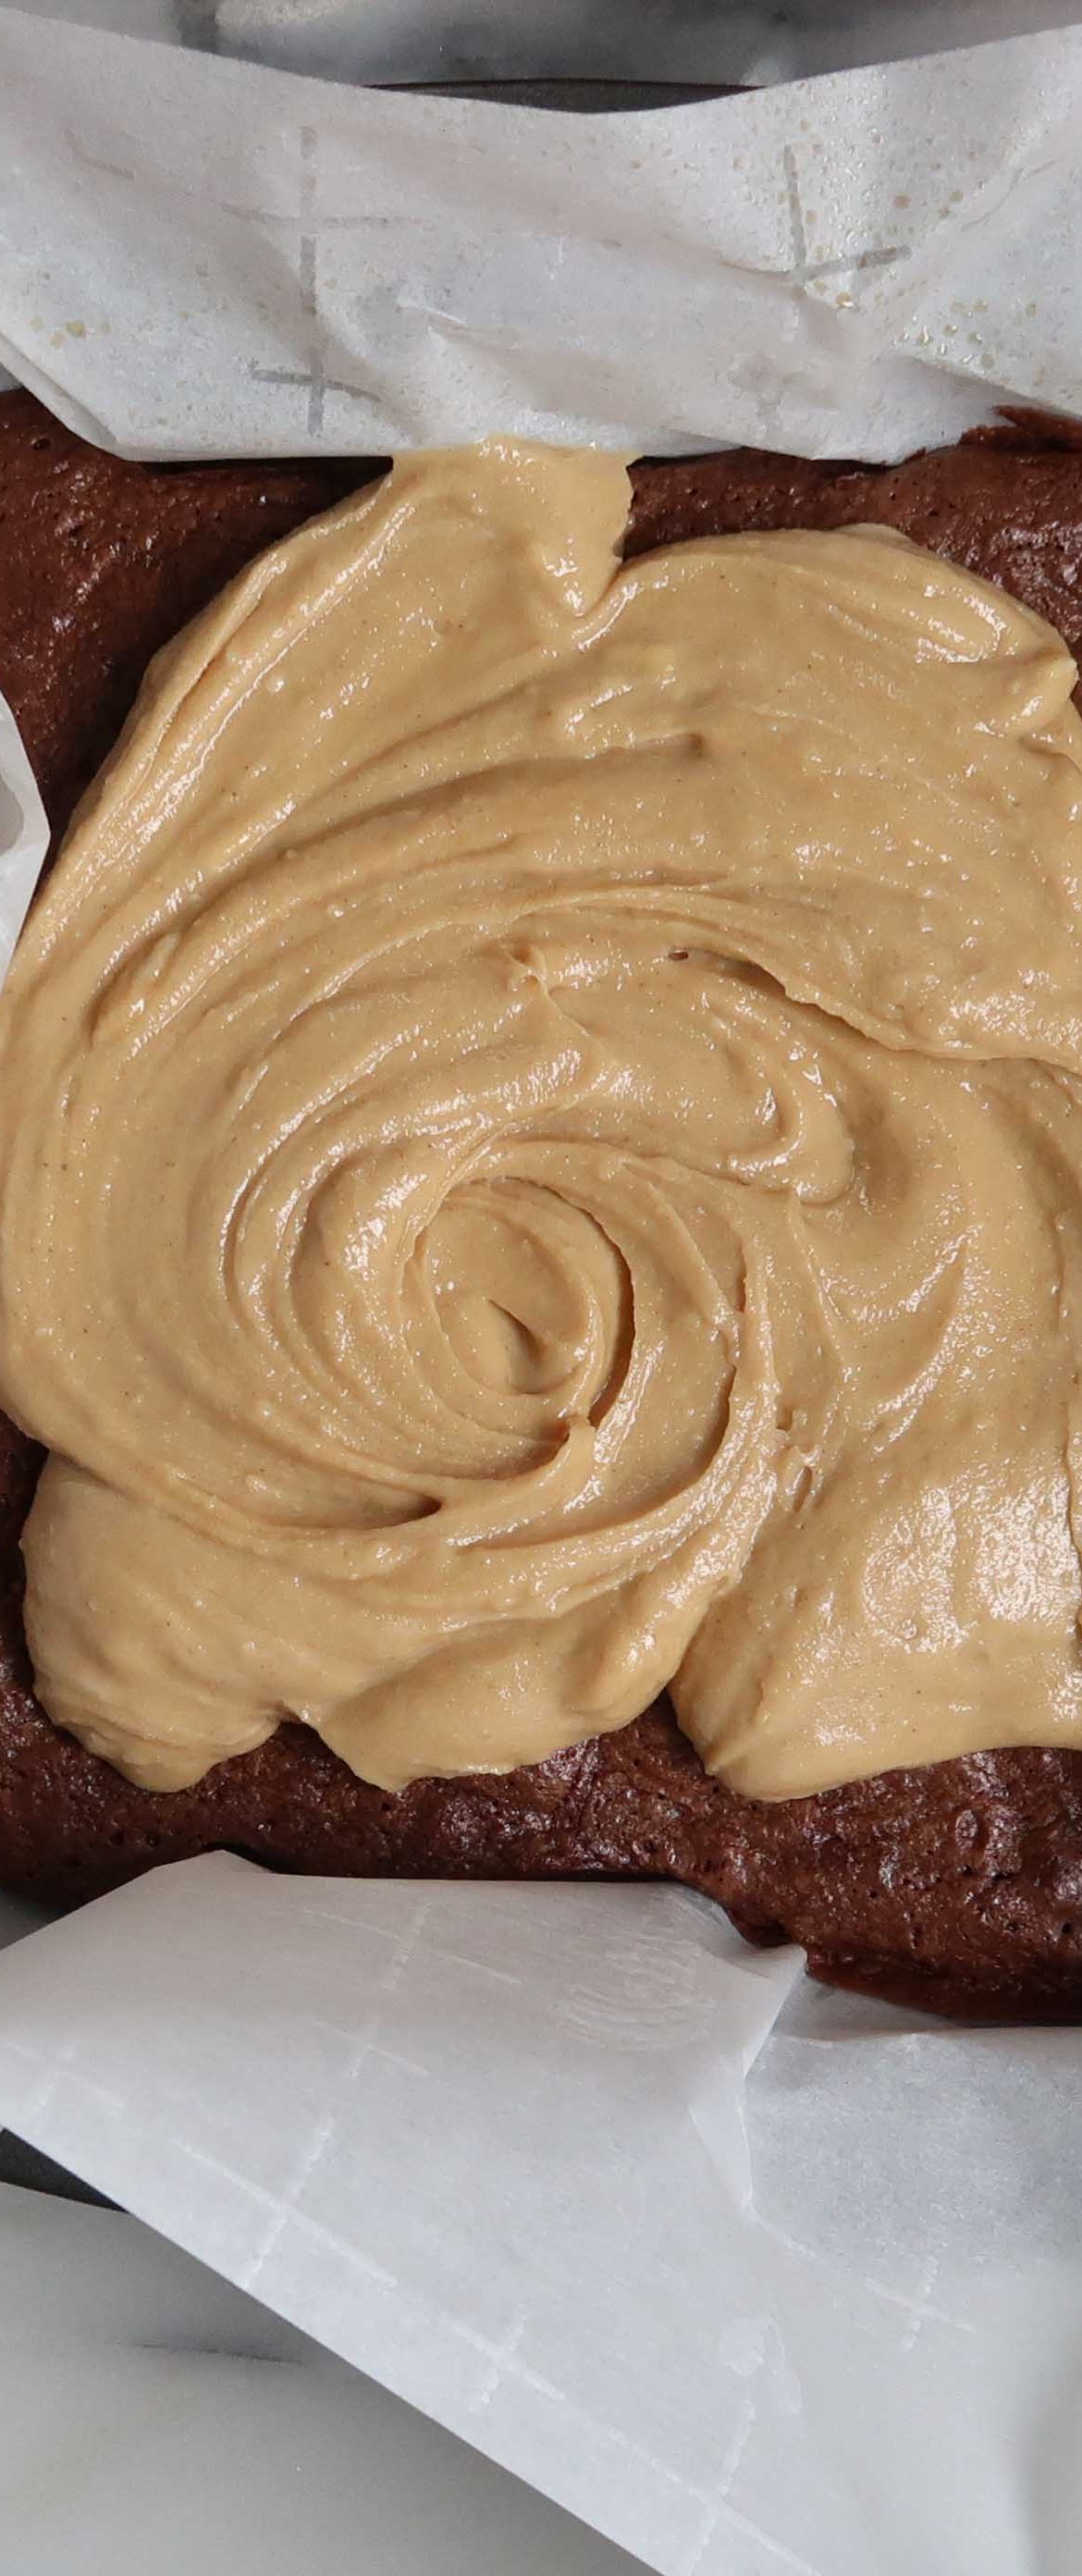 Jennifer Farley's Chocolate Brownies with Salted Tahini Frosting